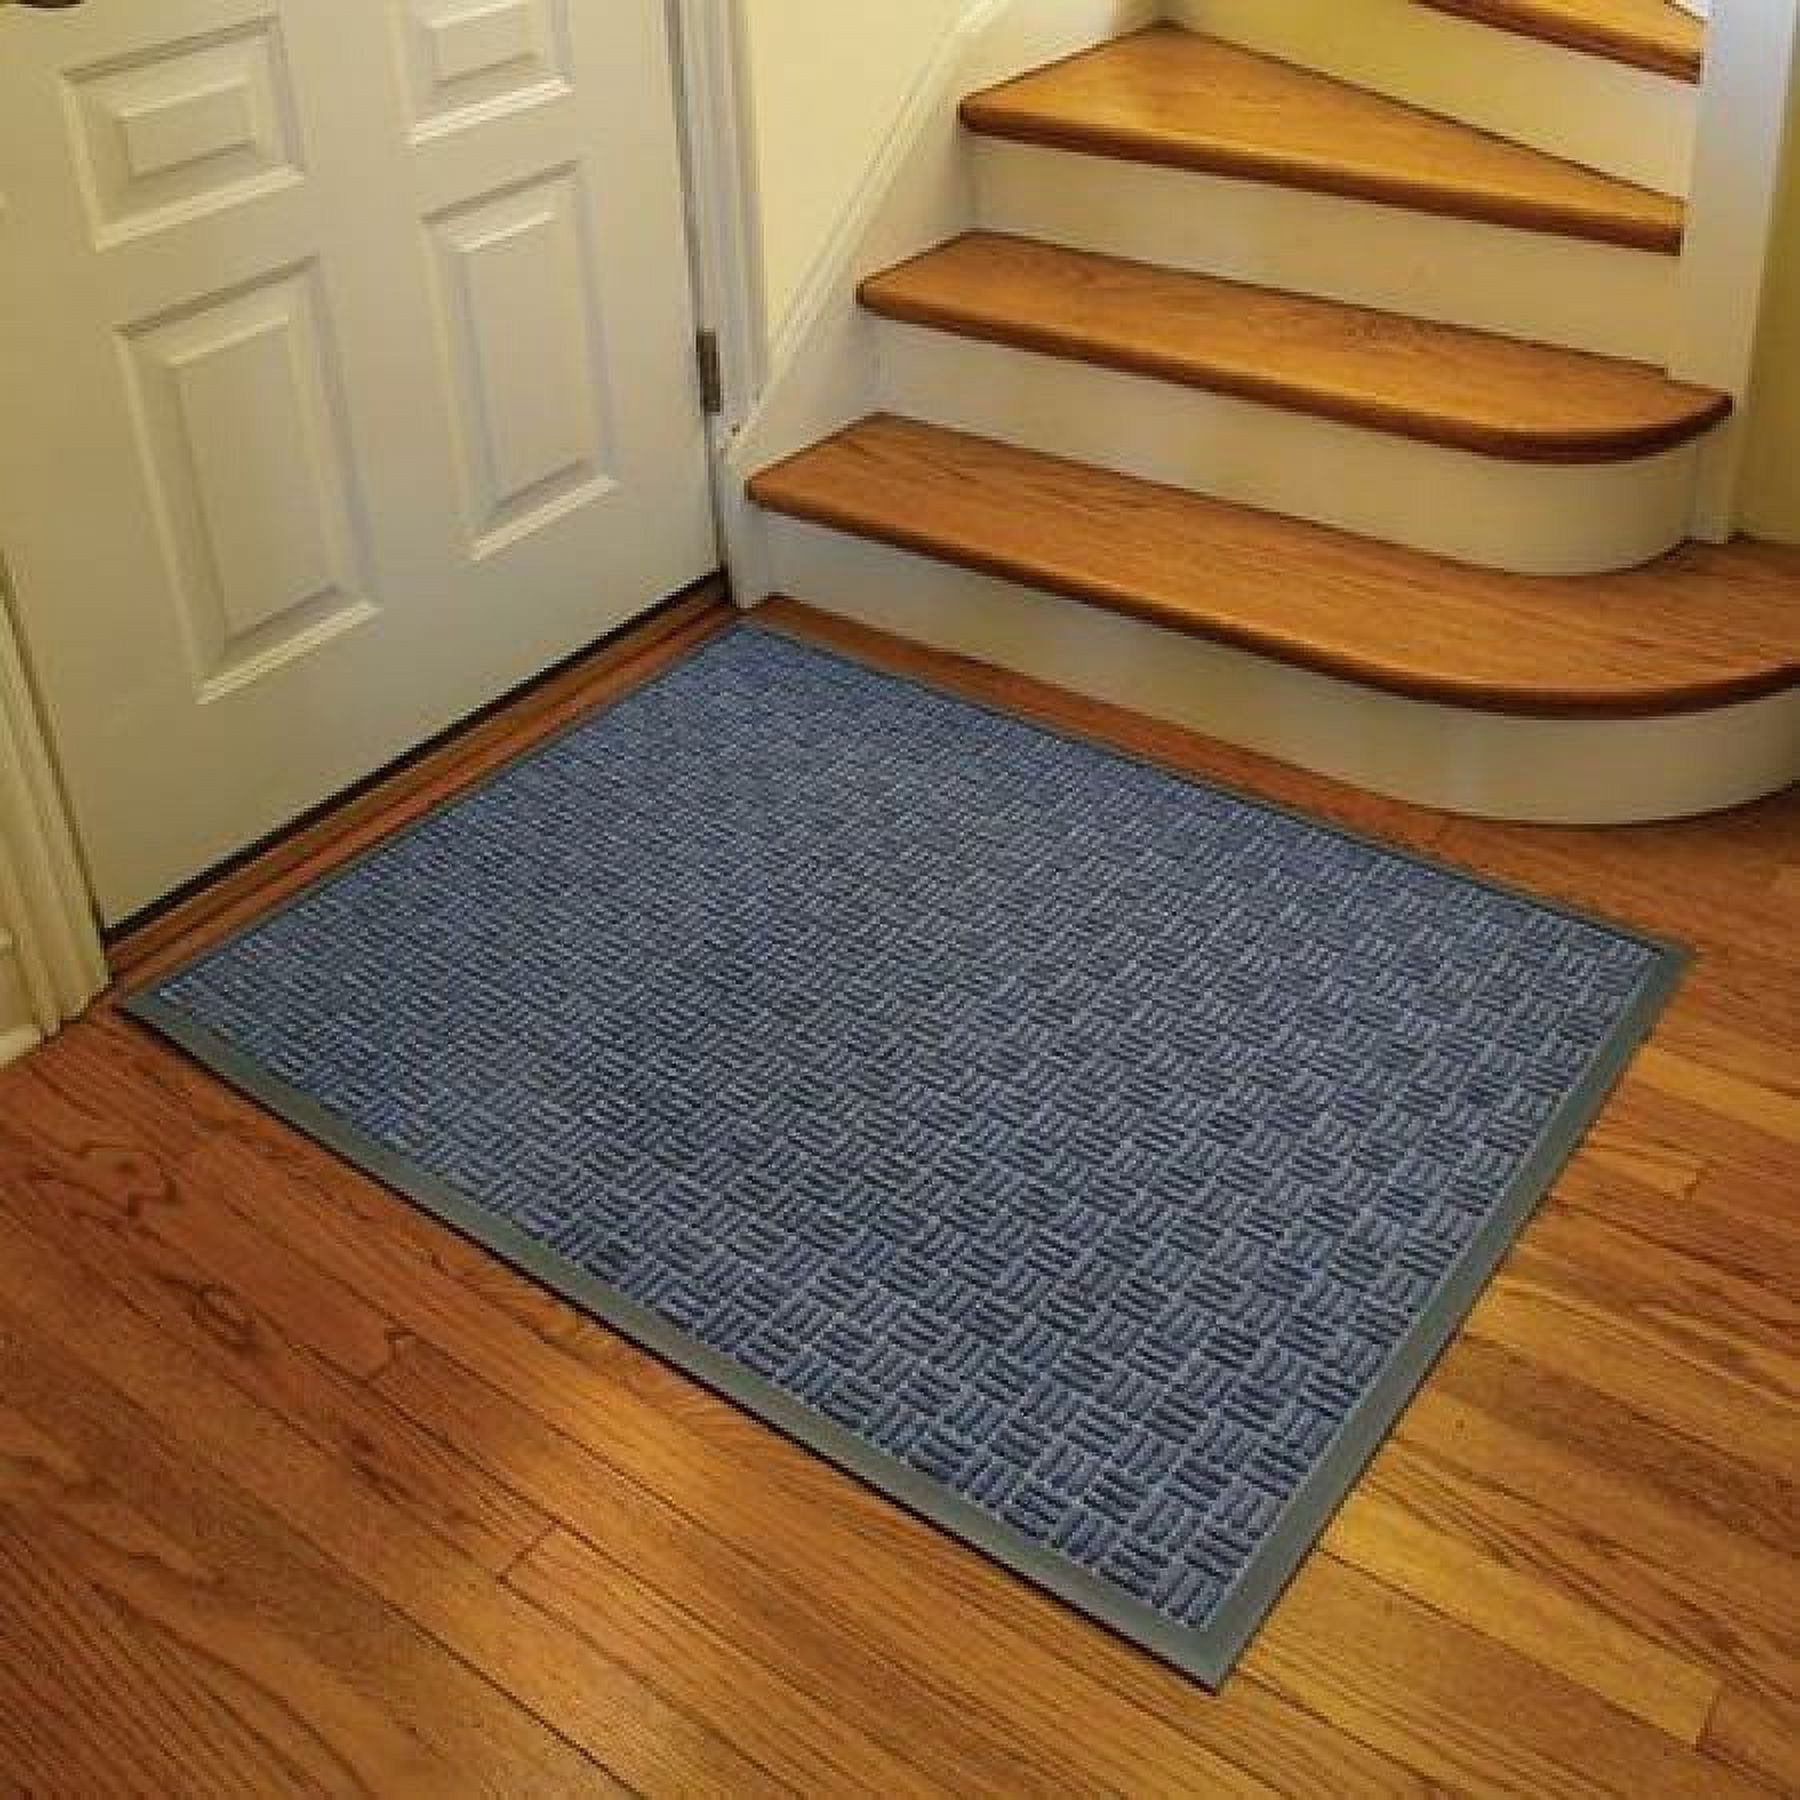 Notrax Carpeted Entrance Mat,Blue,3ft. x 5ft.  167S0035BU - image 3 of 5